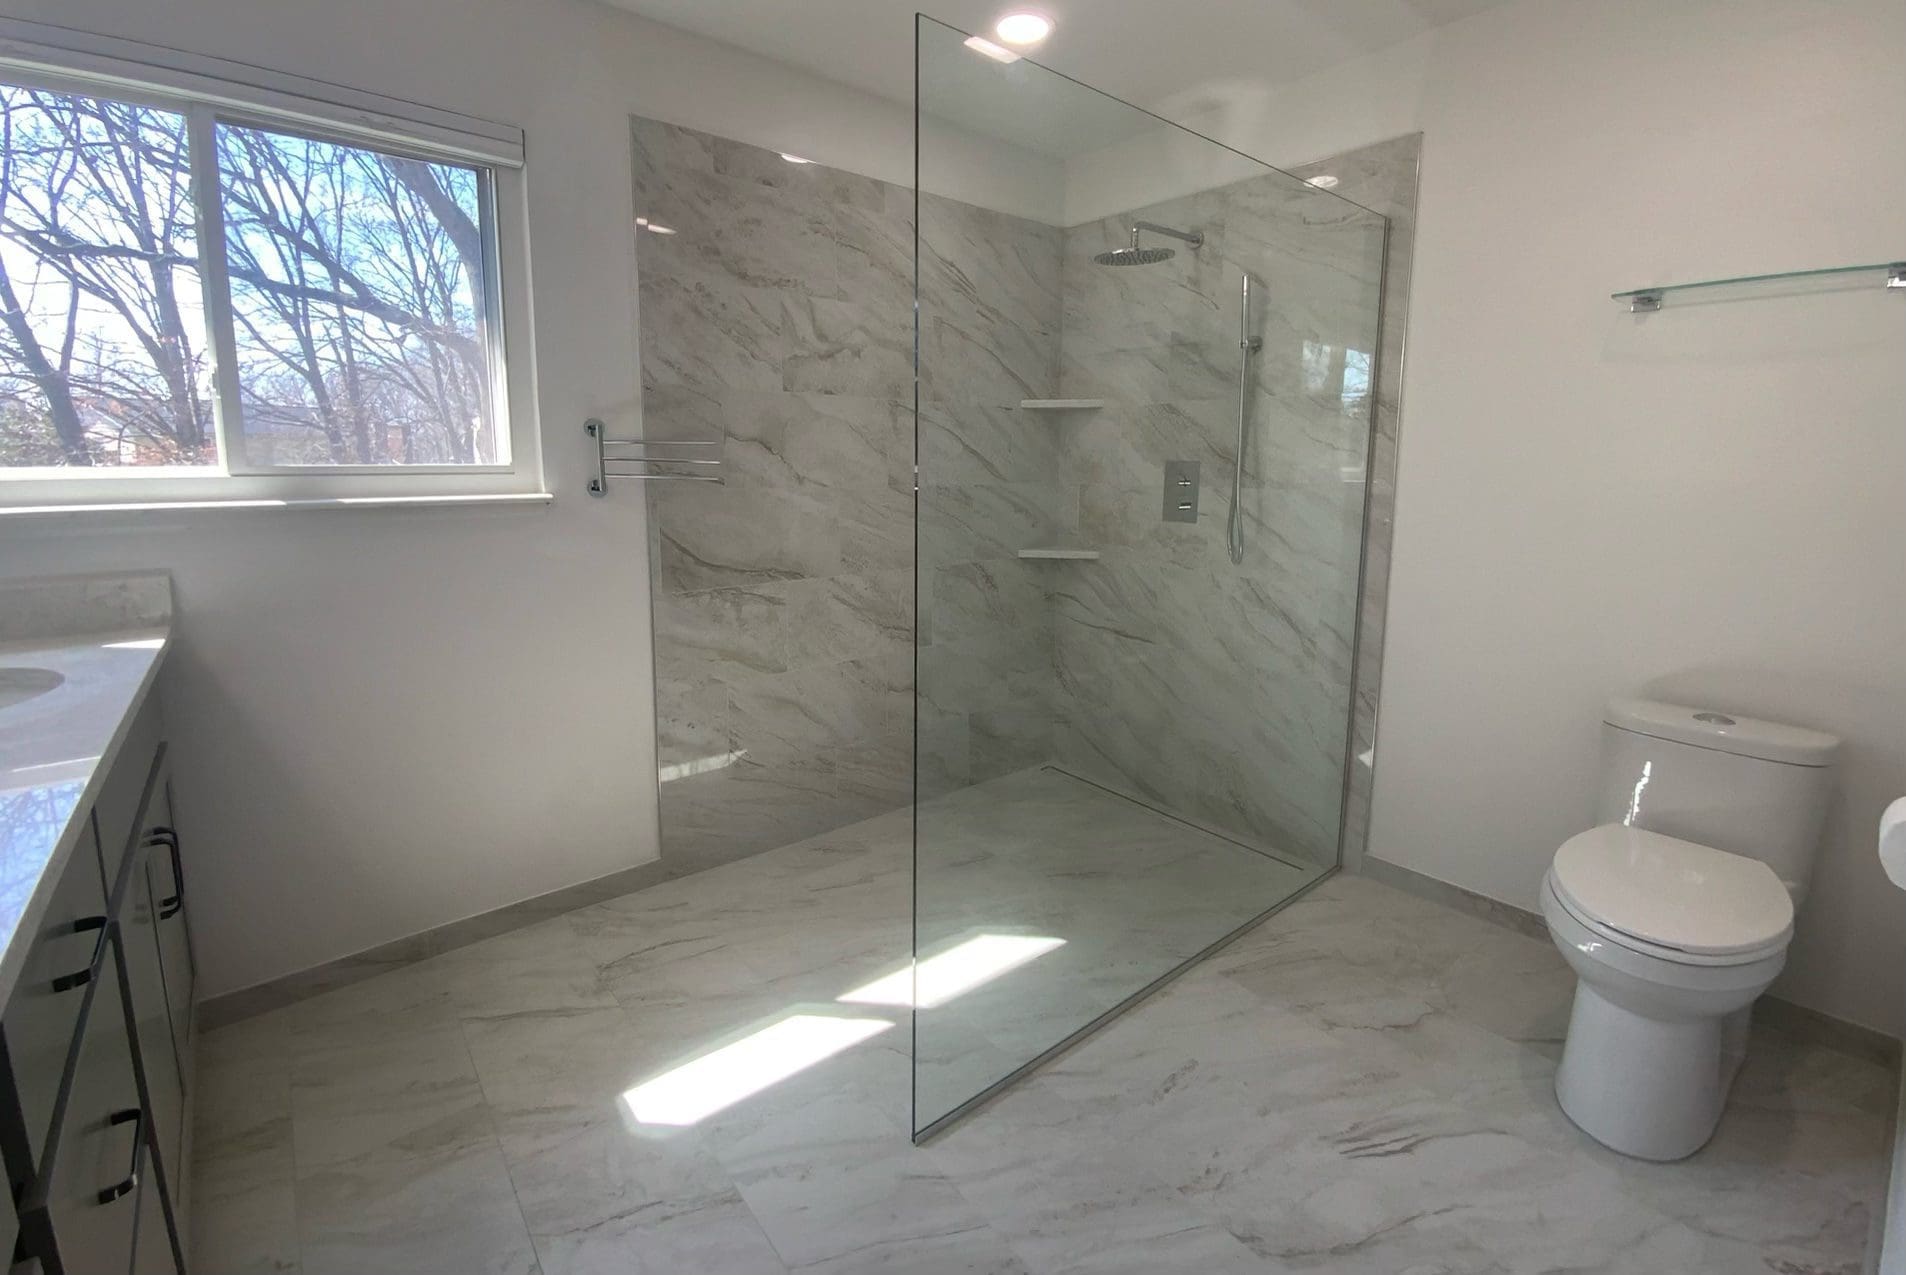 A curbless shower done for our client, featuring an off-white color scheme and linear drain.